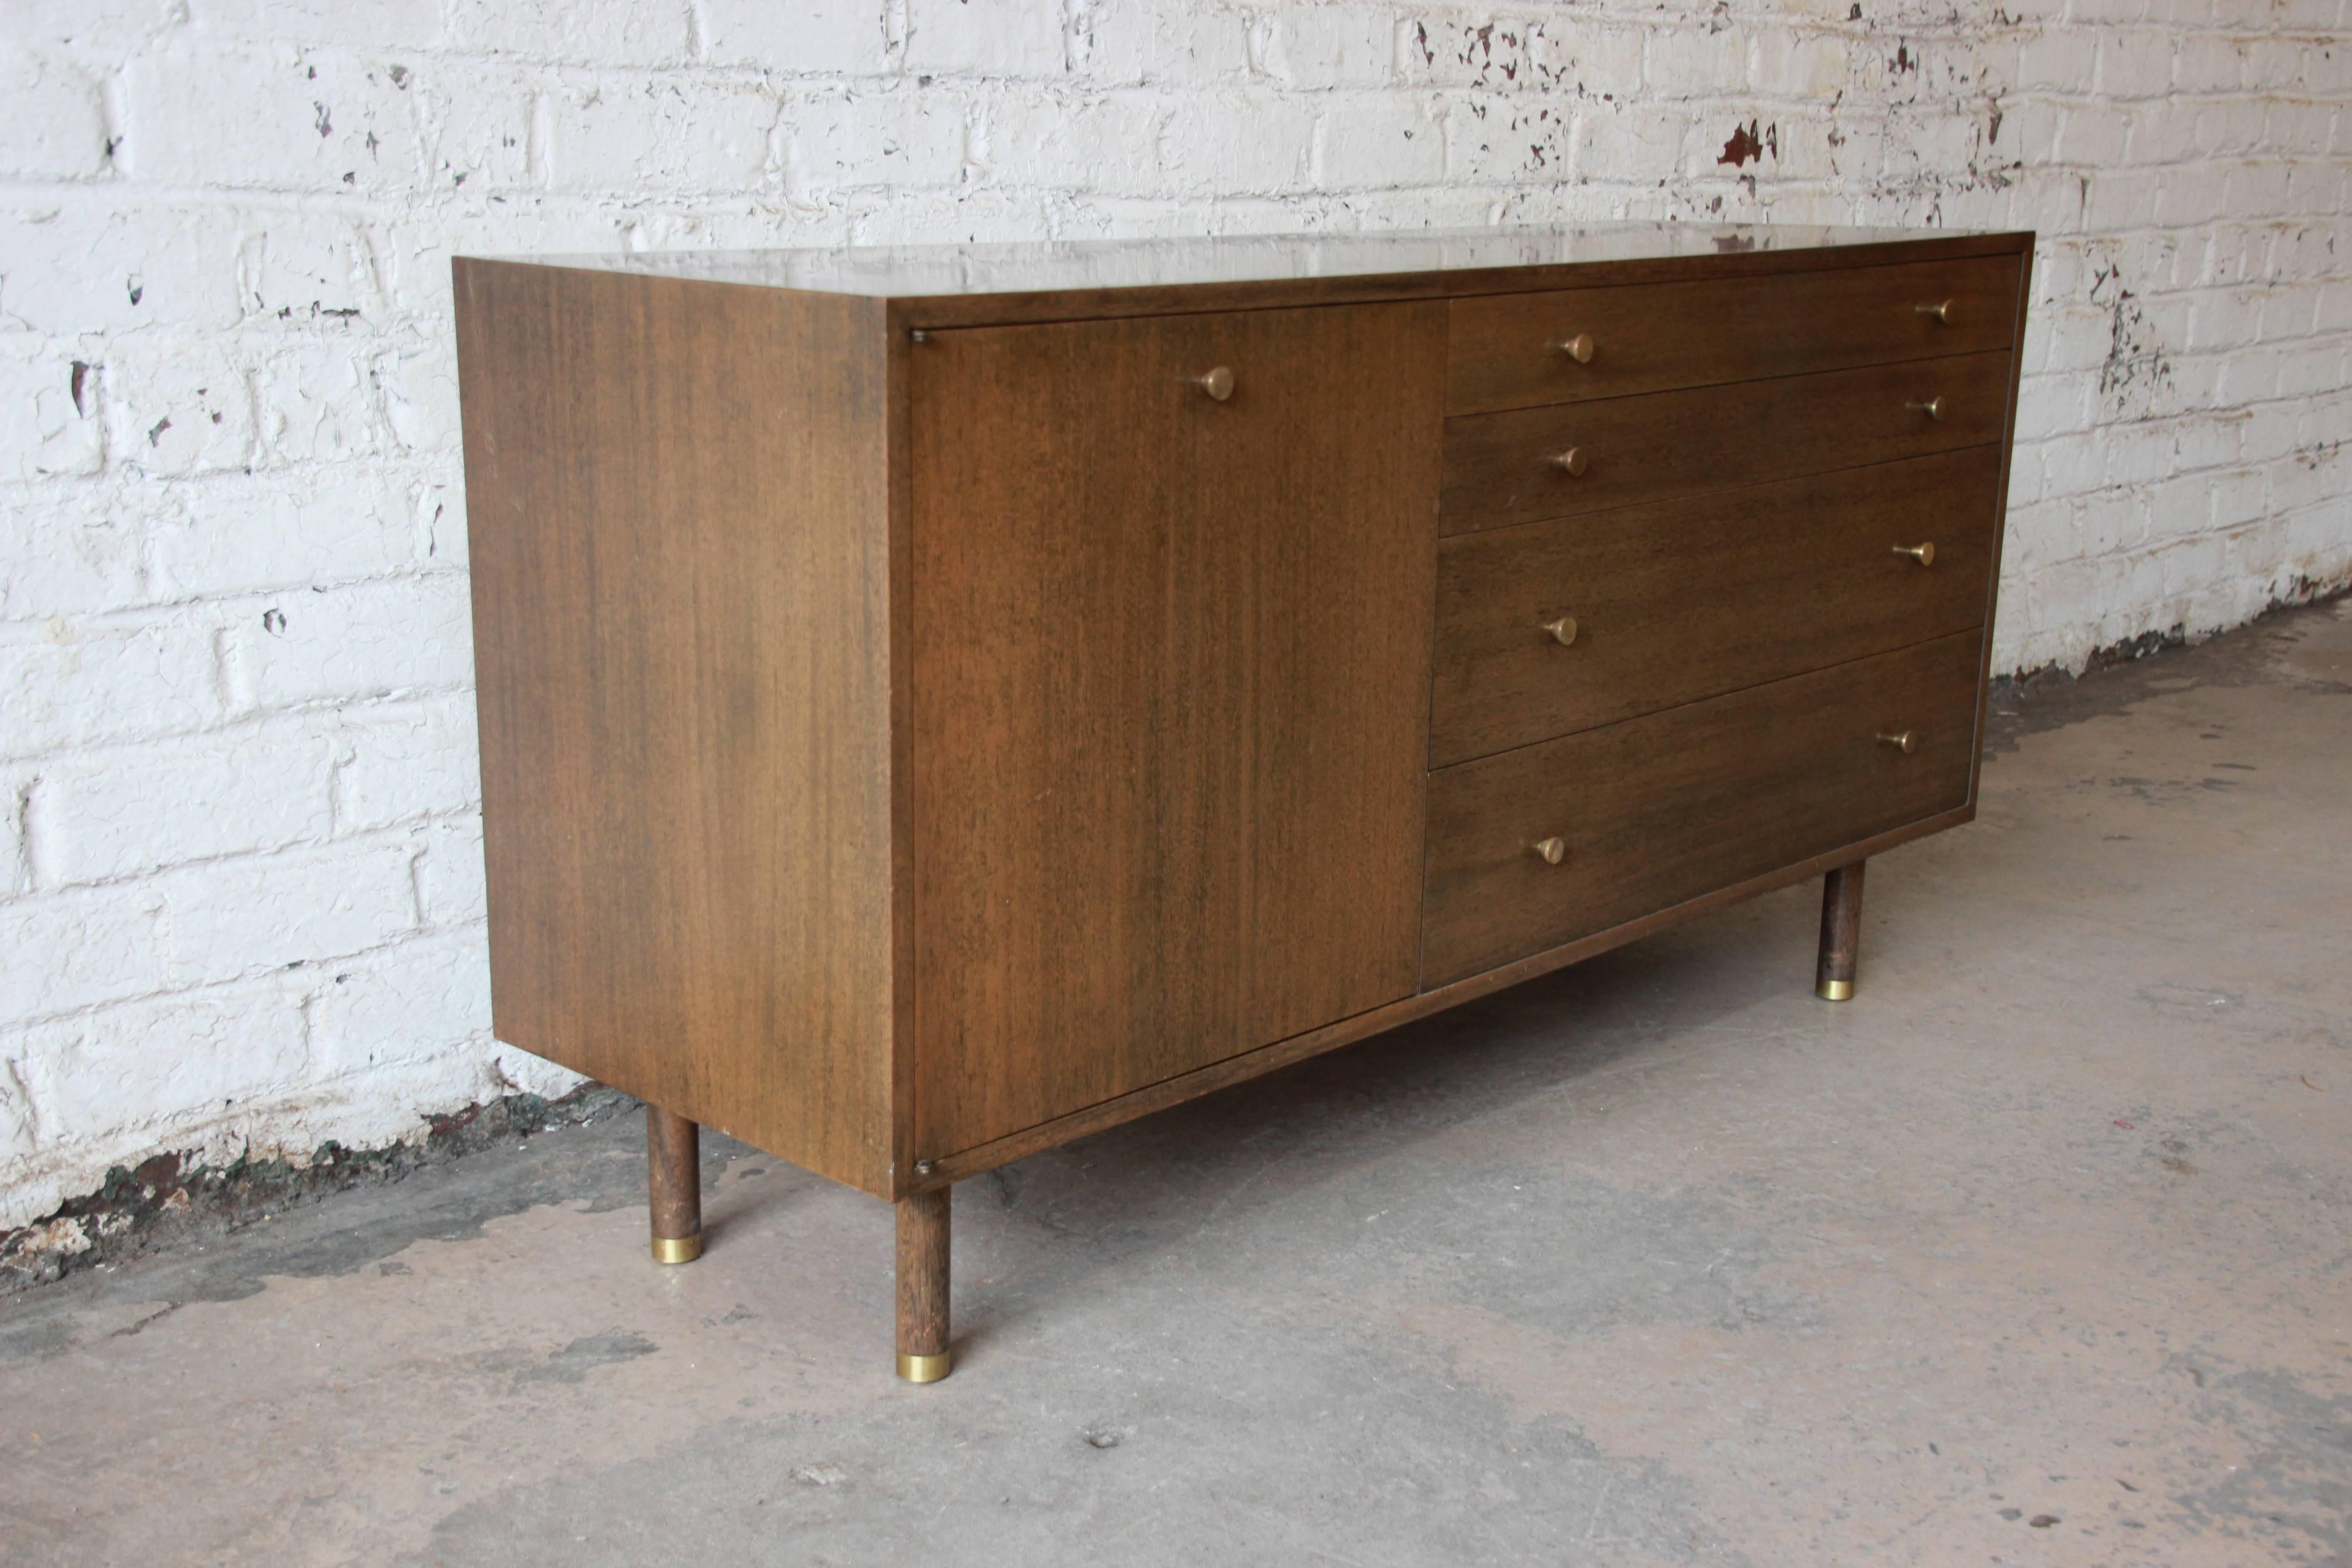 An exceptional Mid-Century Modern credenza designed by Harvey Probber. The credenza features beautiful mahogany wood grain in an ash finish, sleek Mid-Century lines, and original brass hardware. It offers ample room for storage with four drawers and